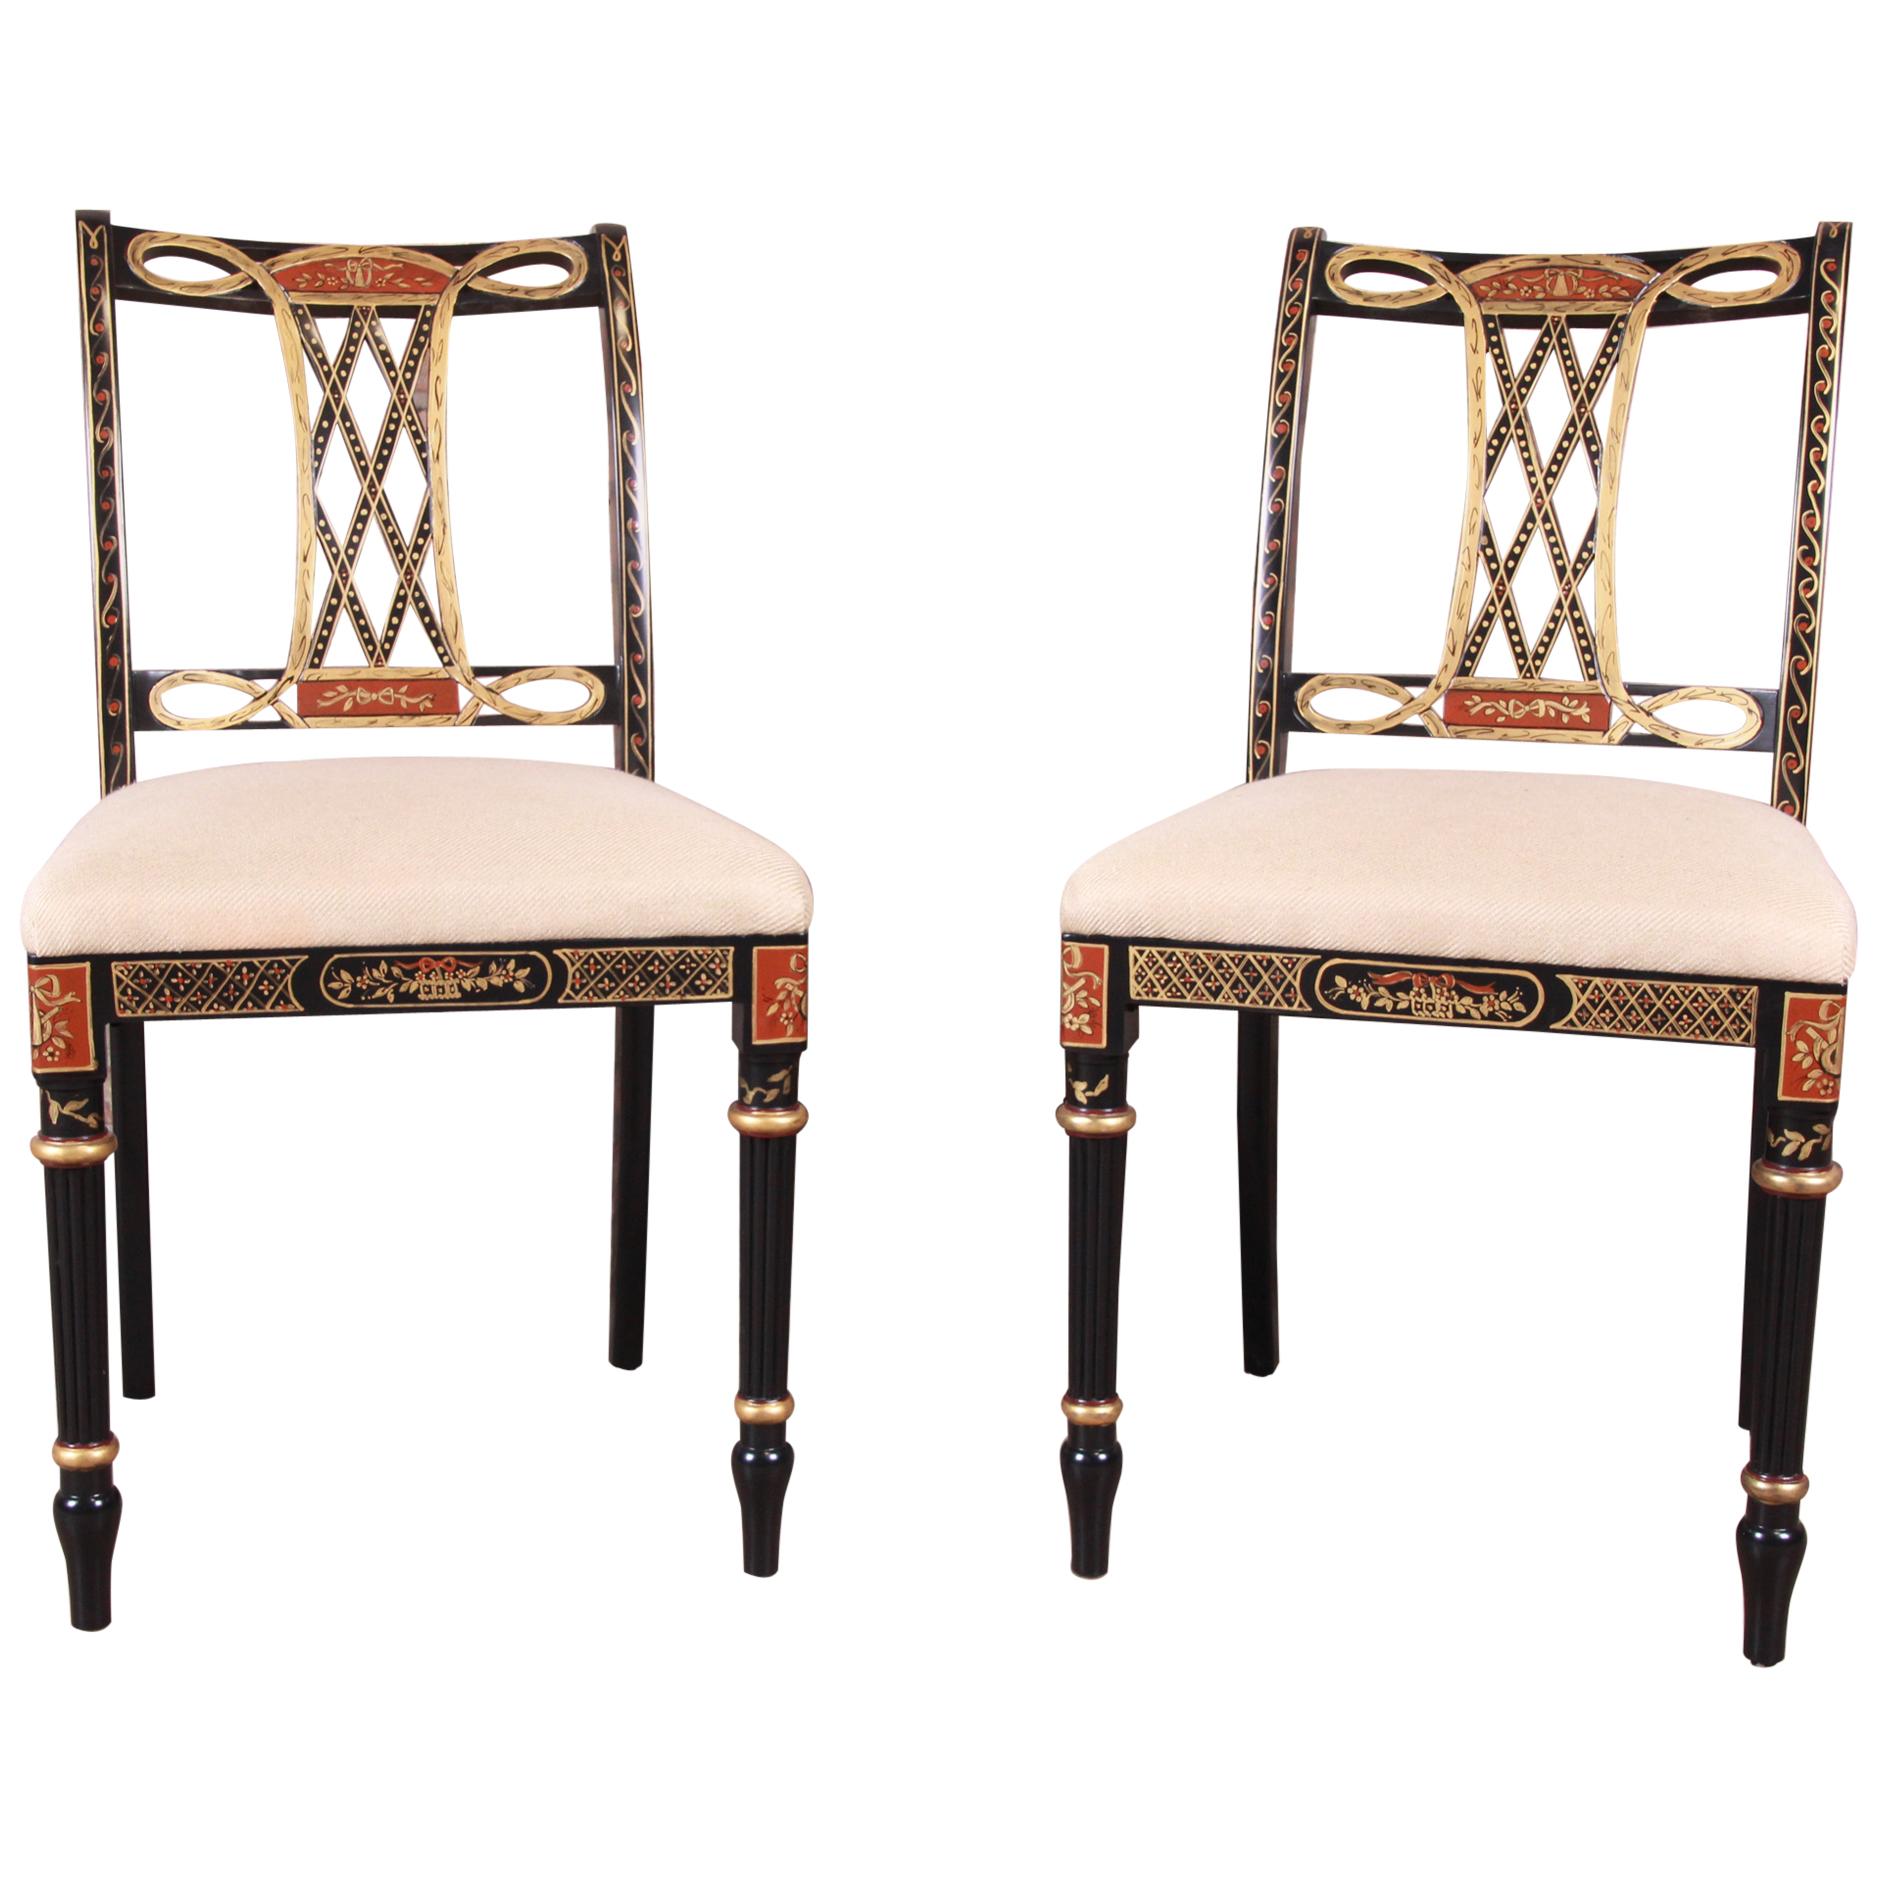 Councill Regency Ebonized Hand Painted Side Chairs, Pair